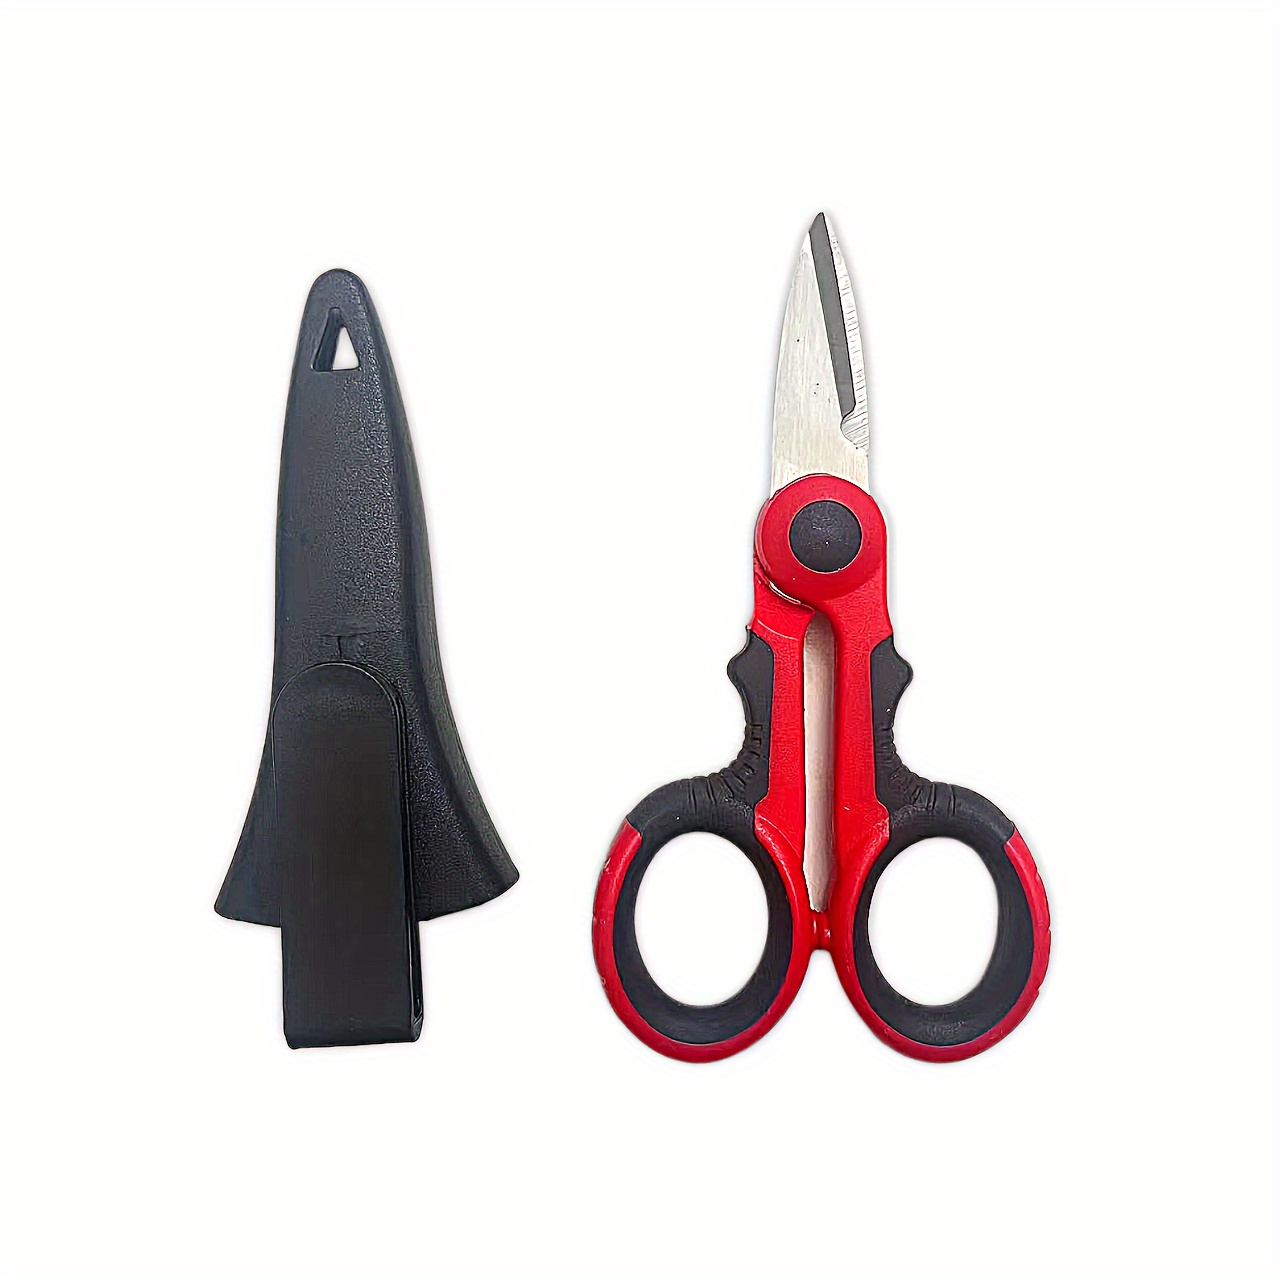 

Heavy-duty Stainless Steel Multi-purpose Scissors - Ideal For Electricians, Fishing Line Cutting & Home Office Use Electrician Scissors